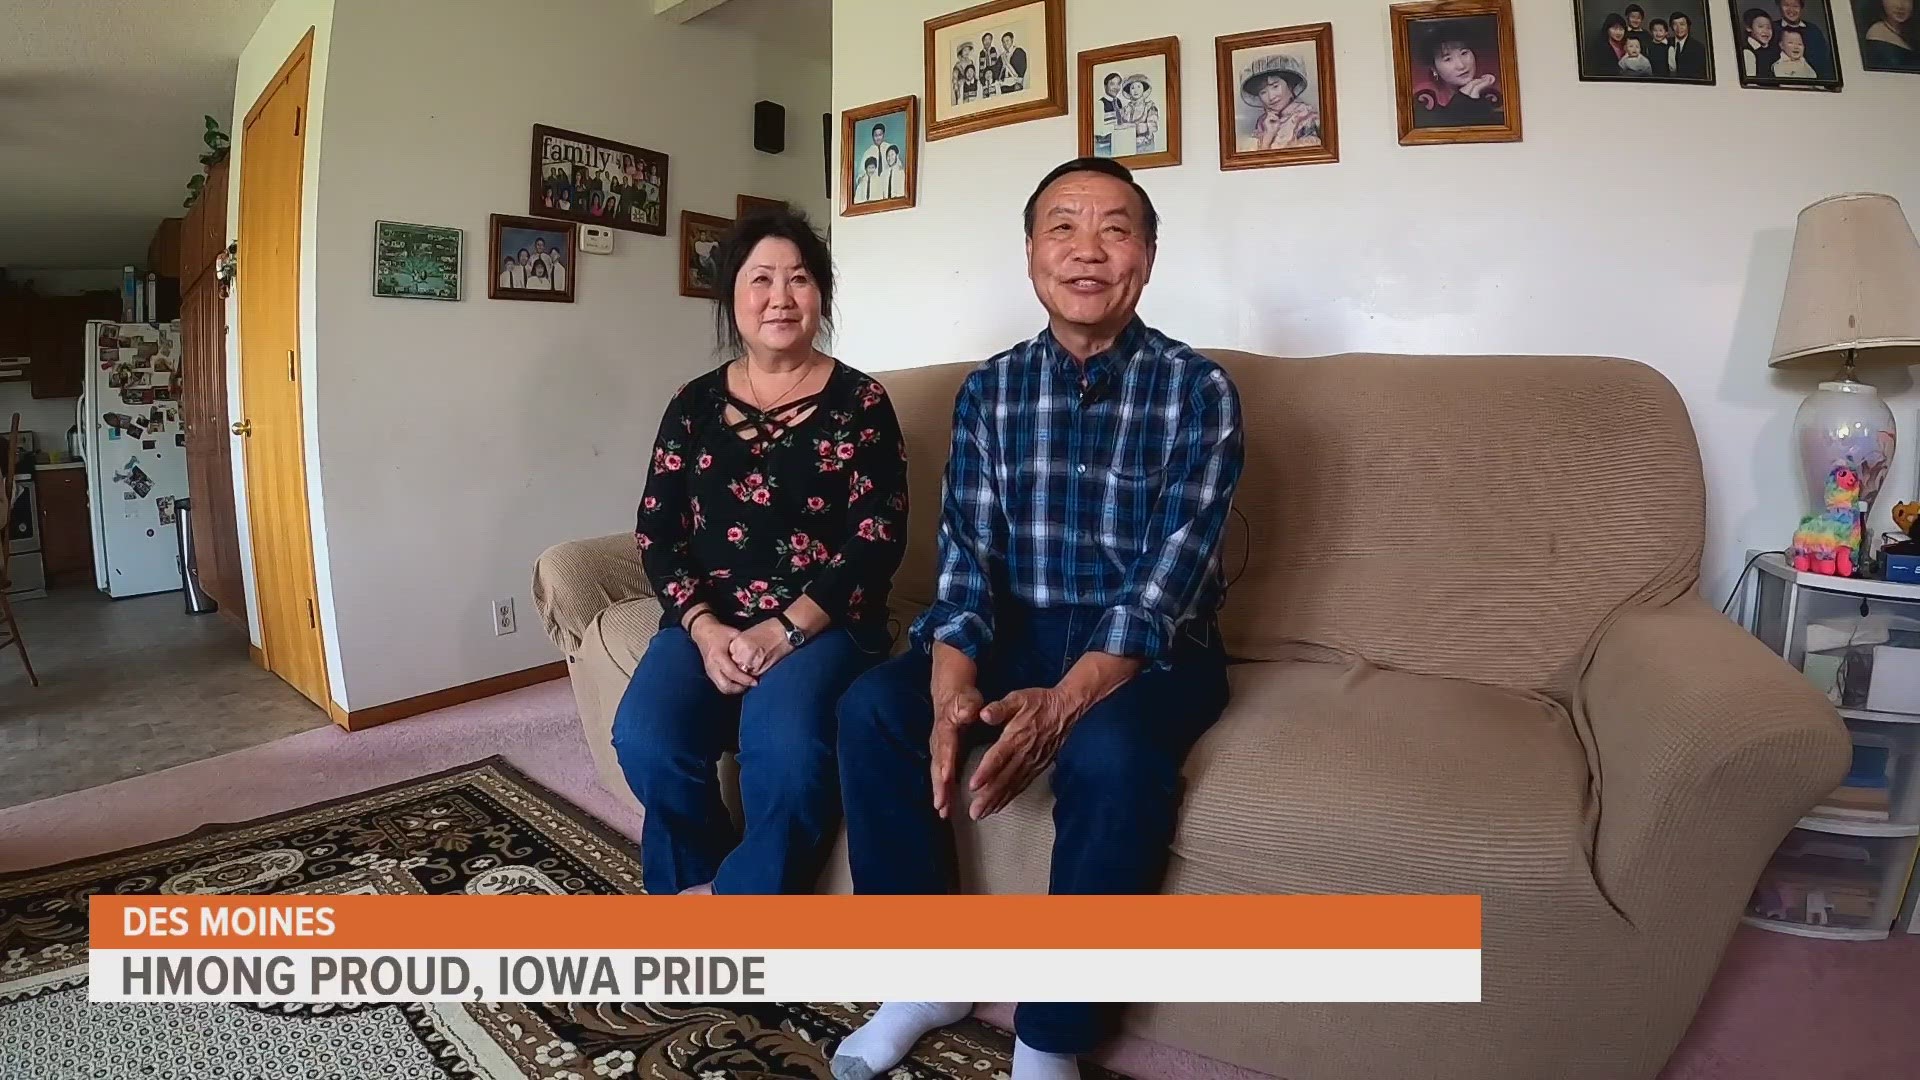 The Sayaxang family is one of the first Hmong families that resettled in Iowa after the Vietnam War, coming to the U.S. in 1976.